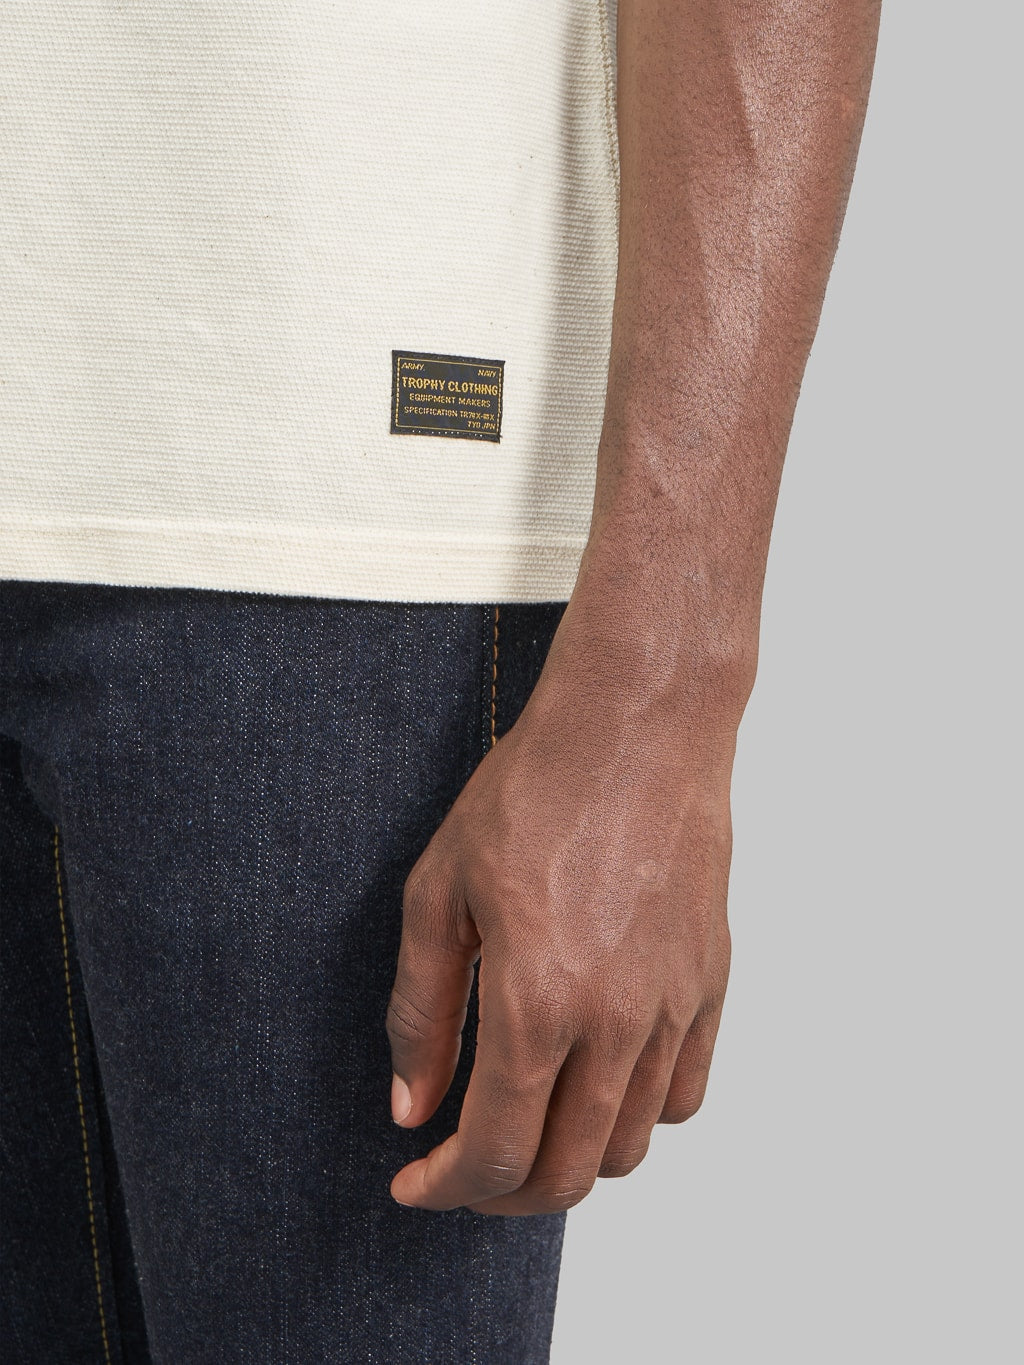 Trophy Clothing Utility Mil Tee natural tag detail